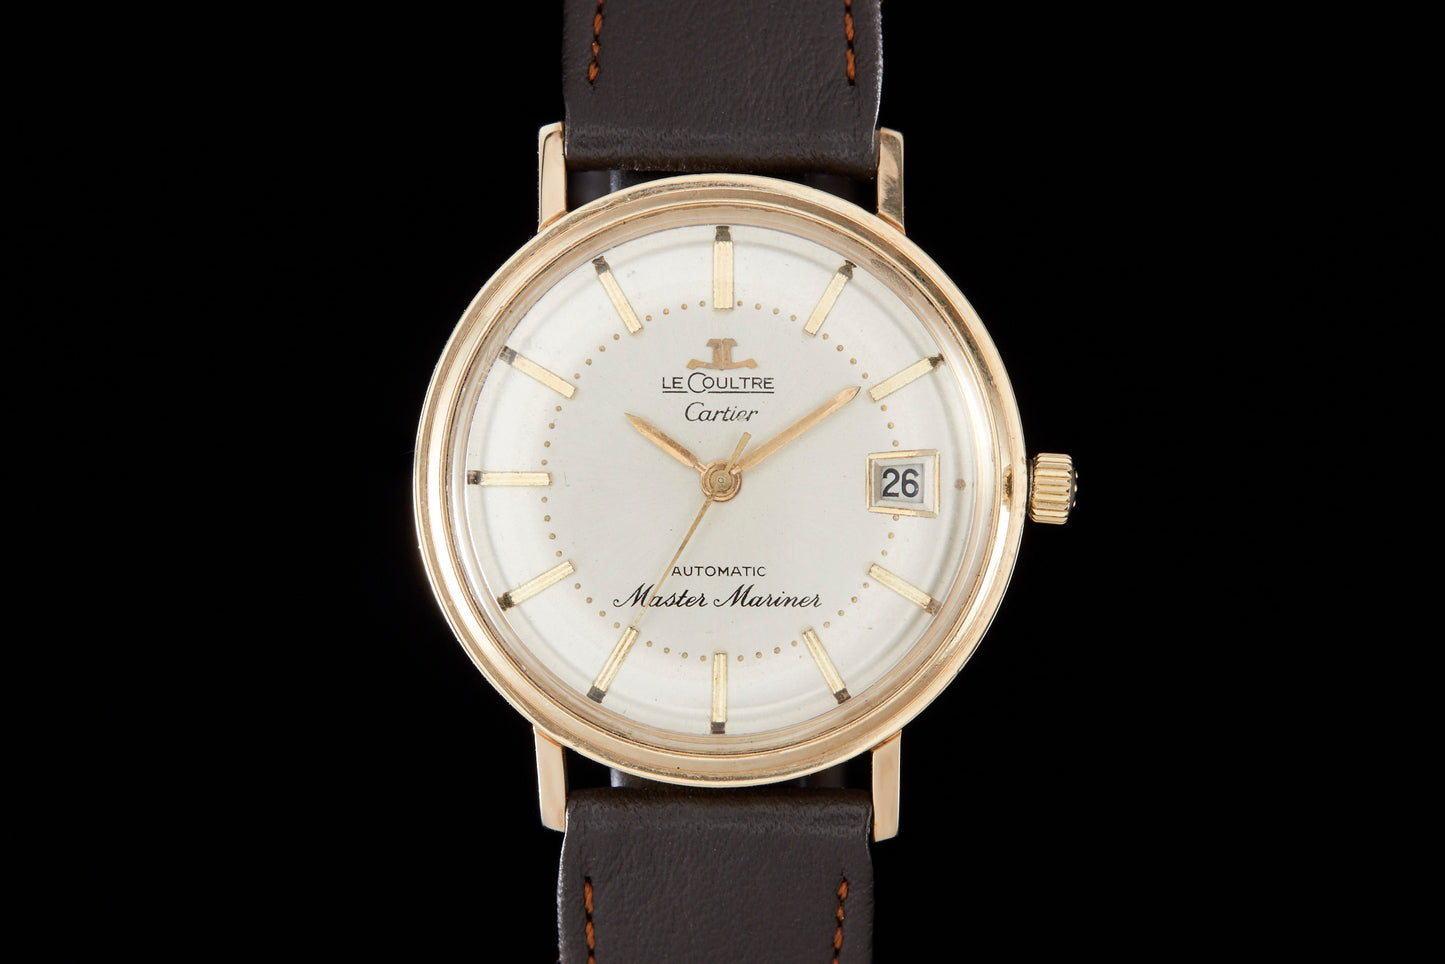 Jaeger LeCoultre Master Mariner Retailed by Cartier